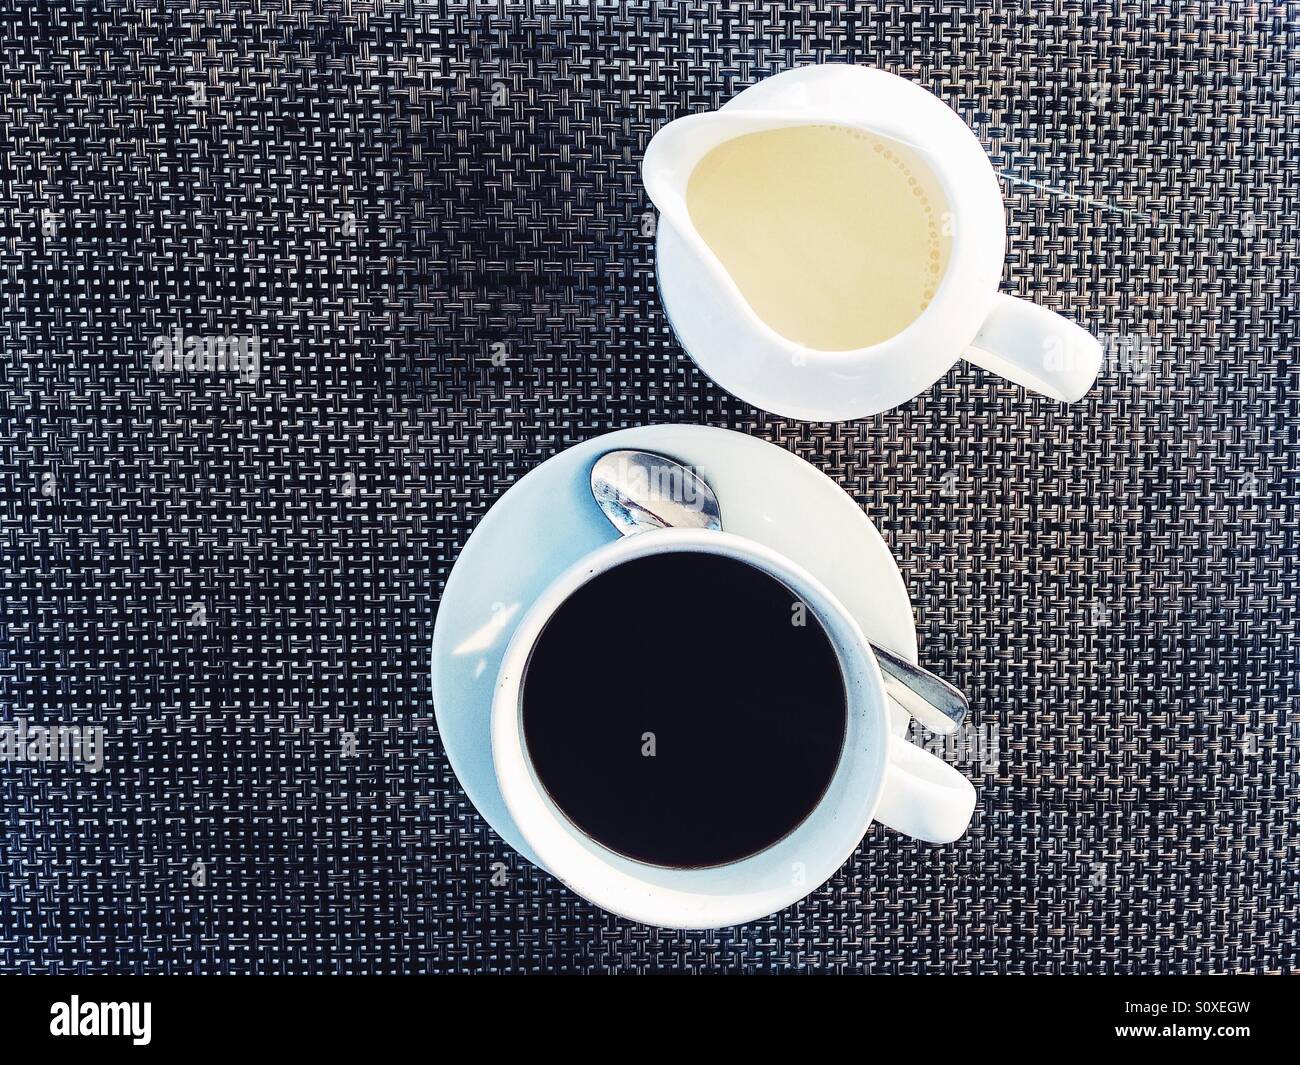 Black coffee and white milk on a black and white surface Stock Photo